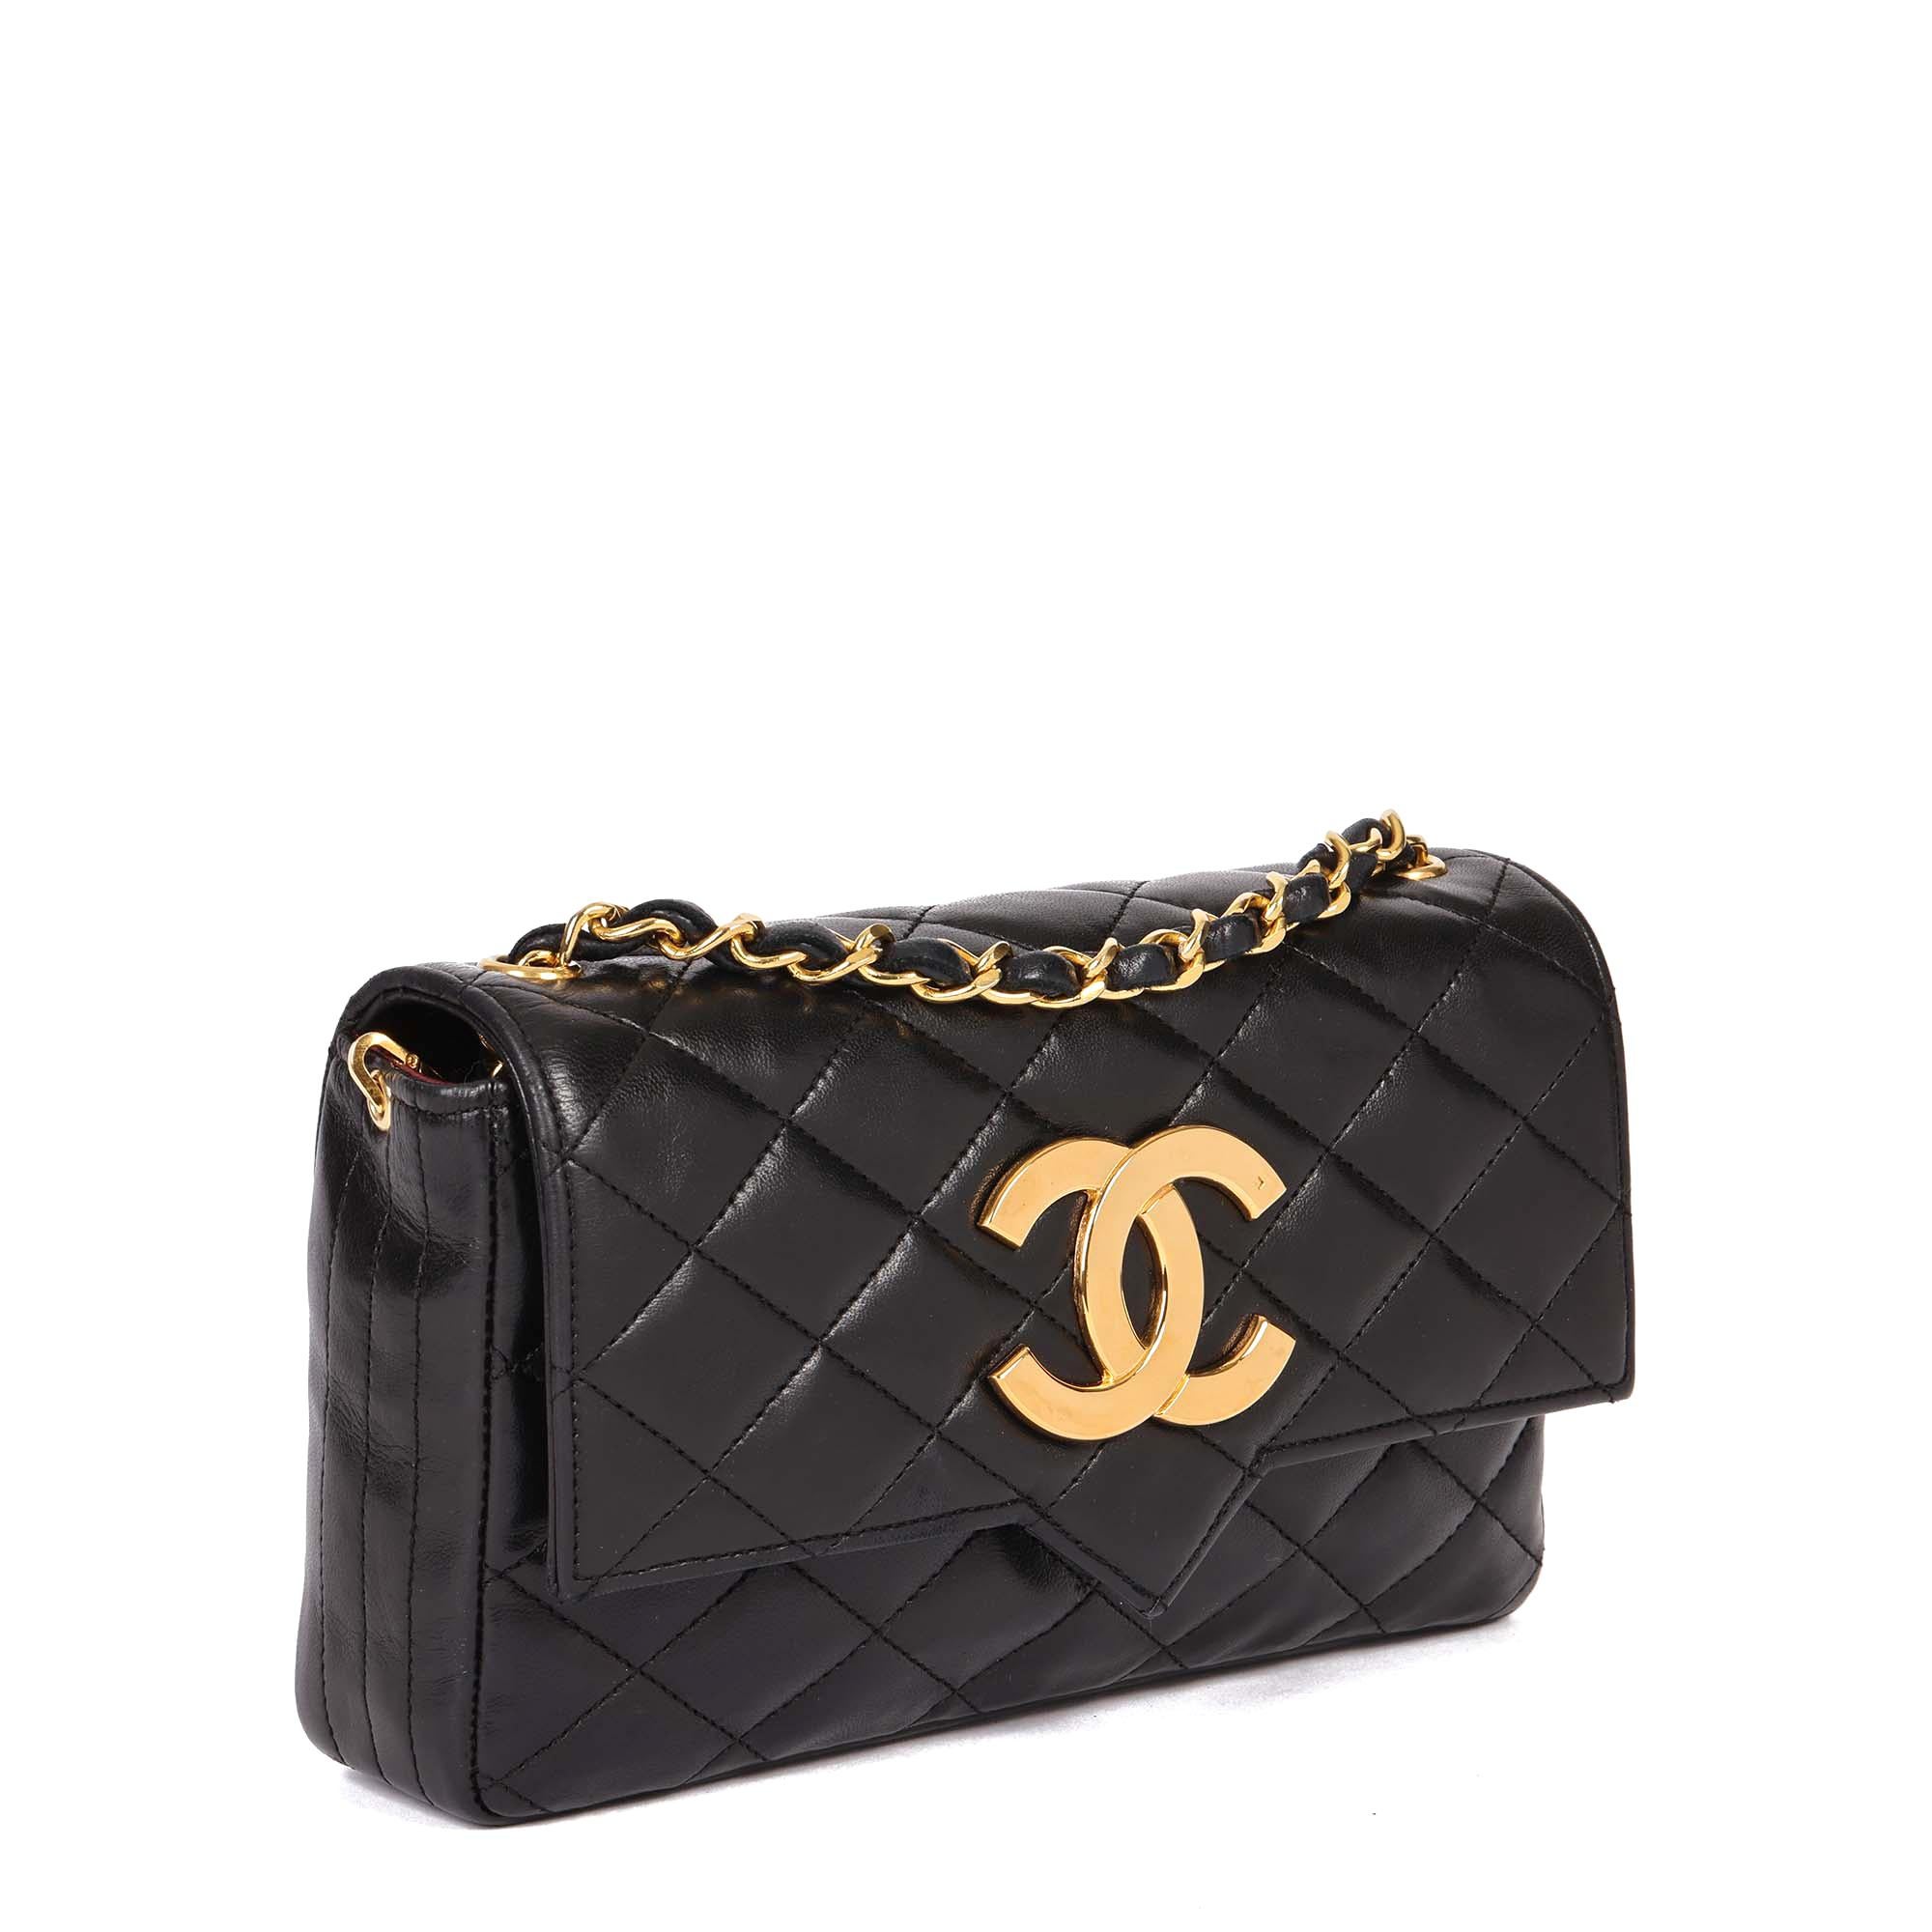 CHANEL
Black Quilted Lambskin Vintage XL Small Classic Single Flap Bag

Serial Number: 0852810
Age (Circa): 1988
Accompanied By: Chanel Dust Bag
Authenticity Details: Serial Sticker (Made in France)
Gender: Ladies
Type: Shoulder, Crossbody

Colour: